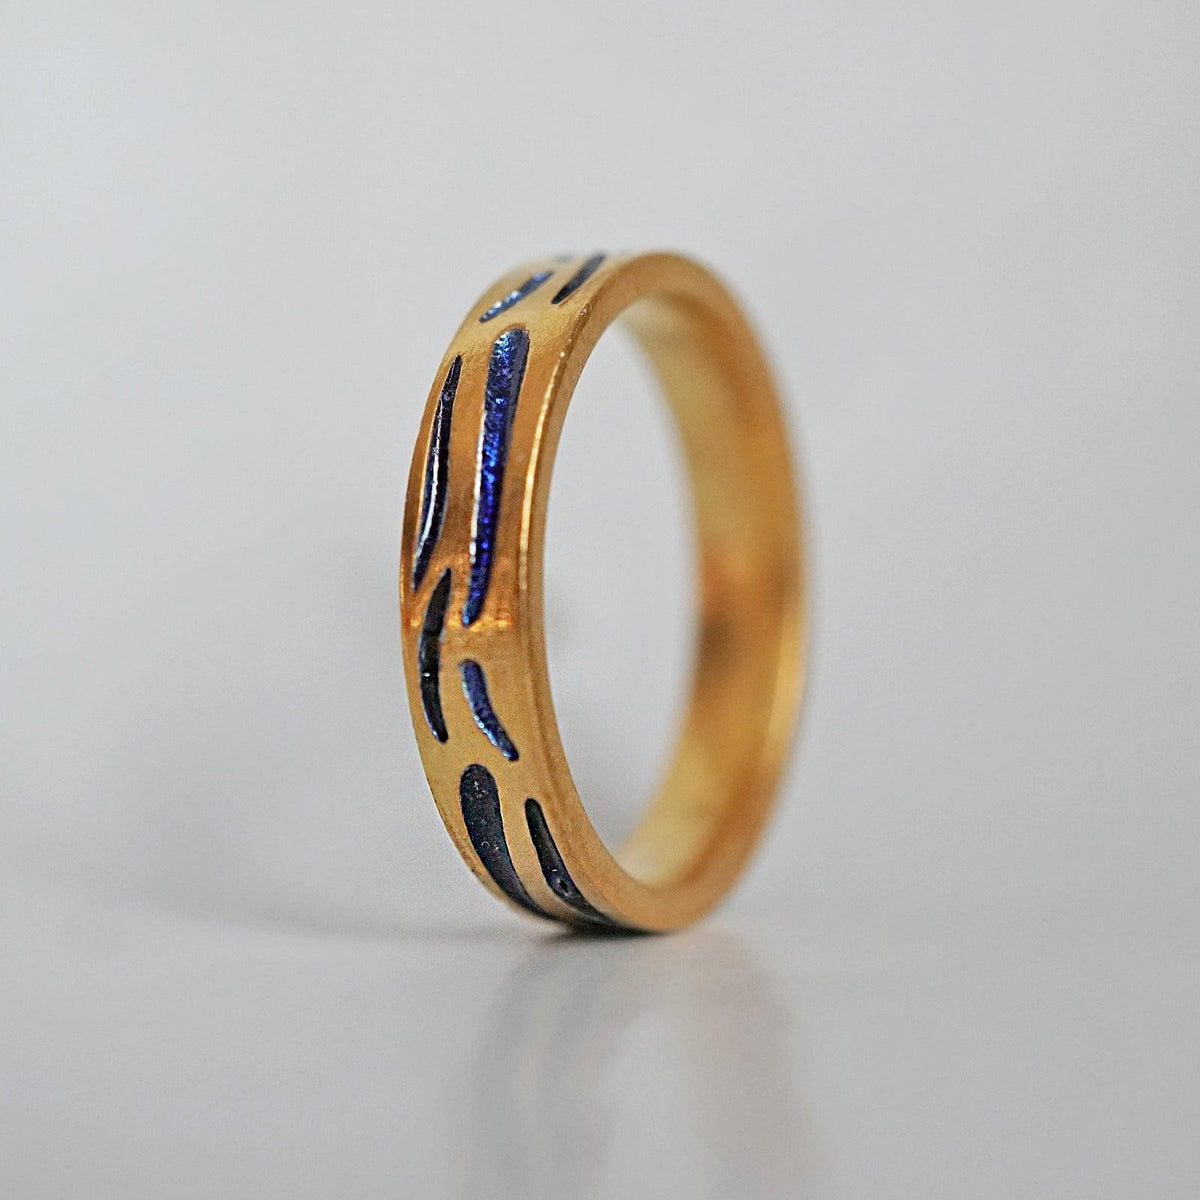 Enamel Ring Band in Sterling Silver and 14K Gold, 3mm